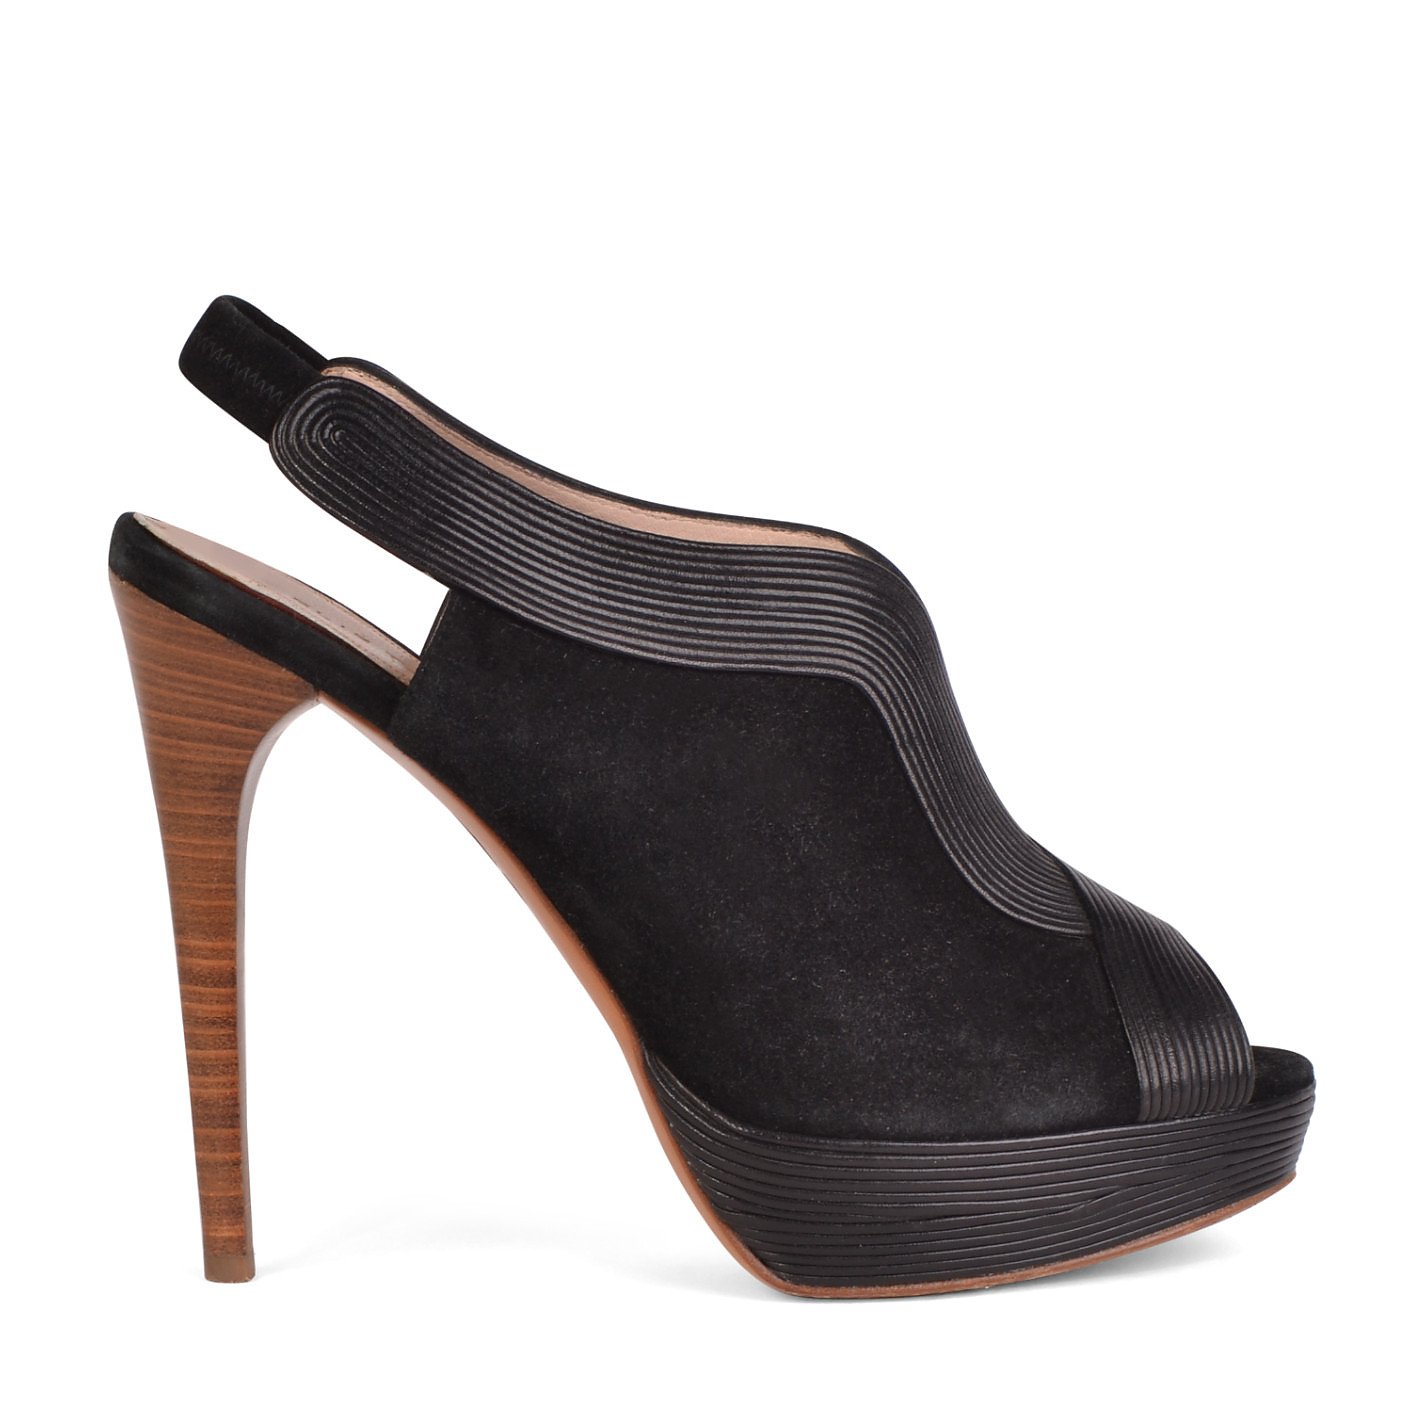 Gina Suede & Leather Peep-Toe Pumps